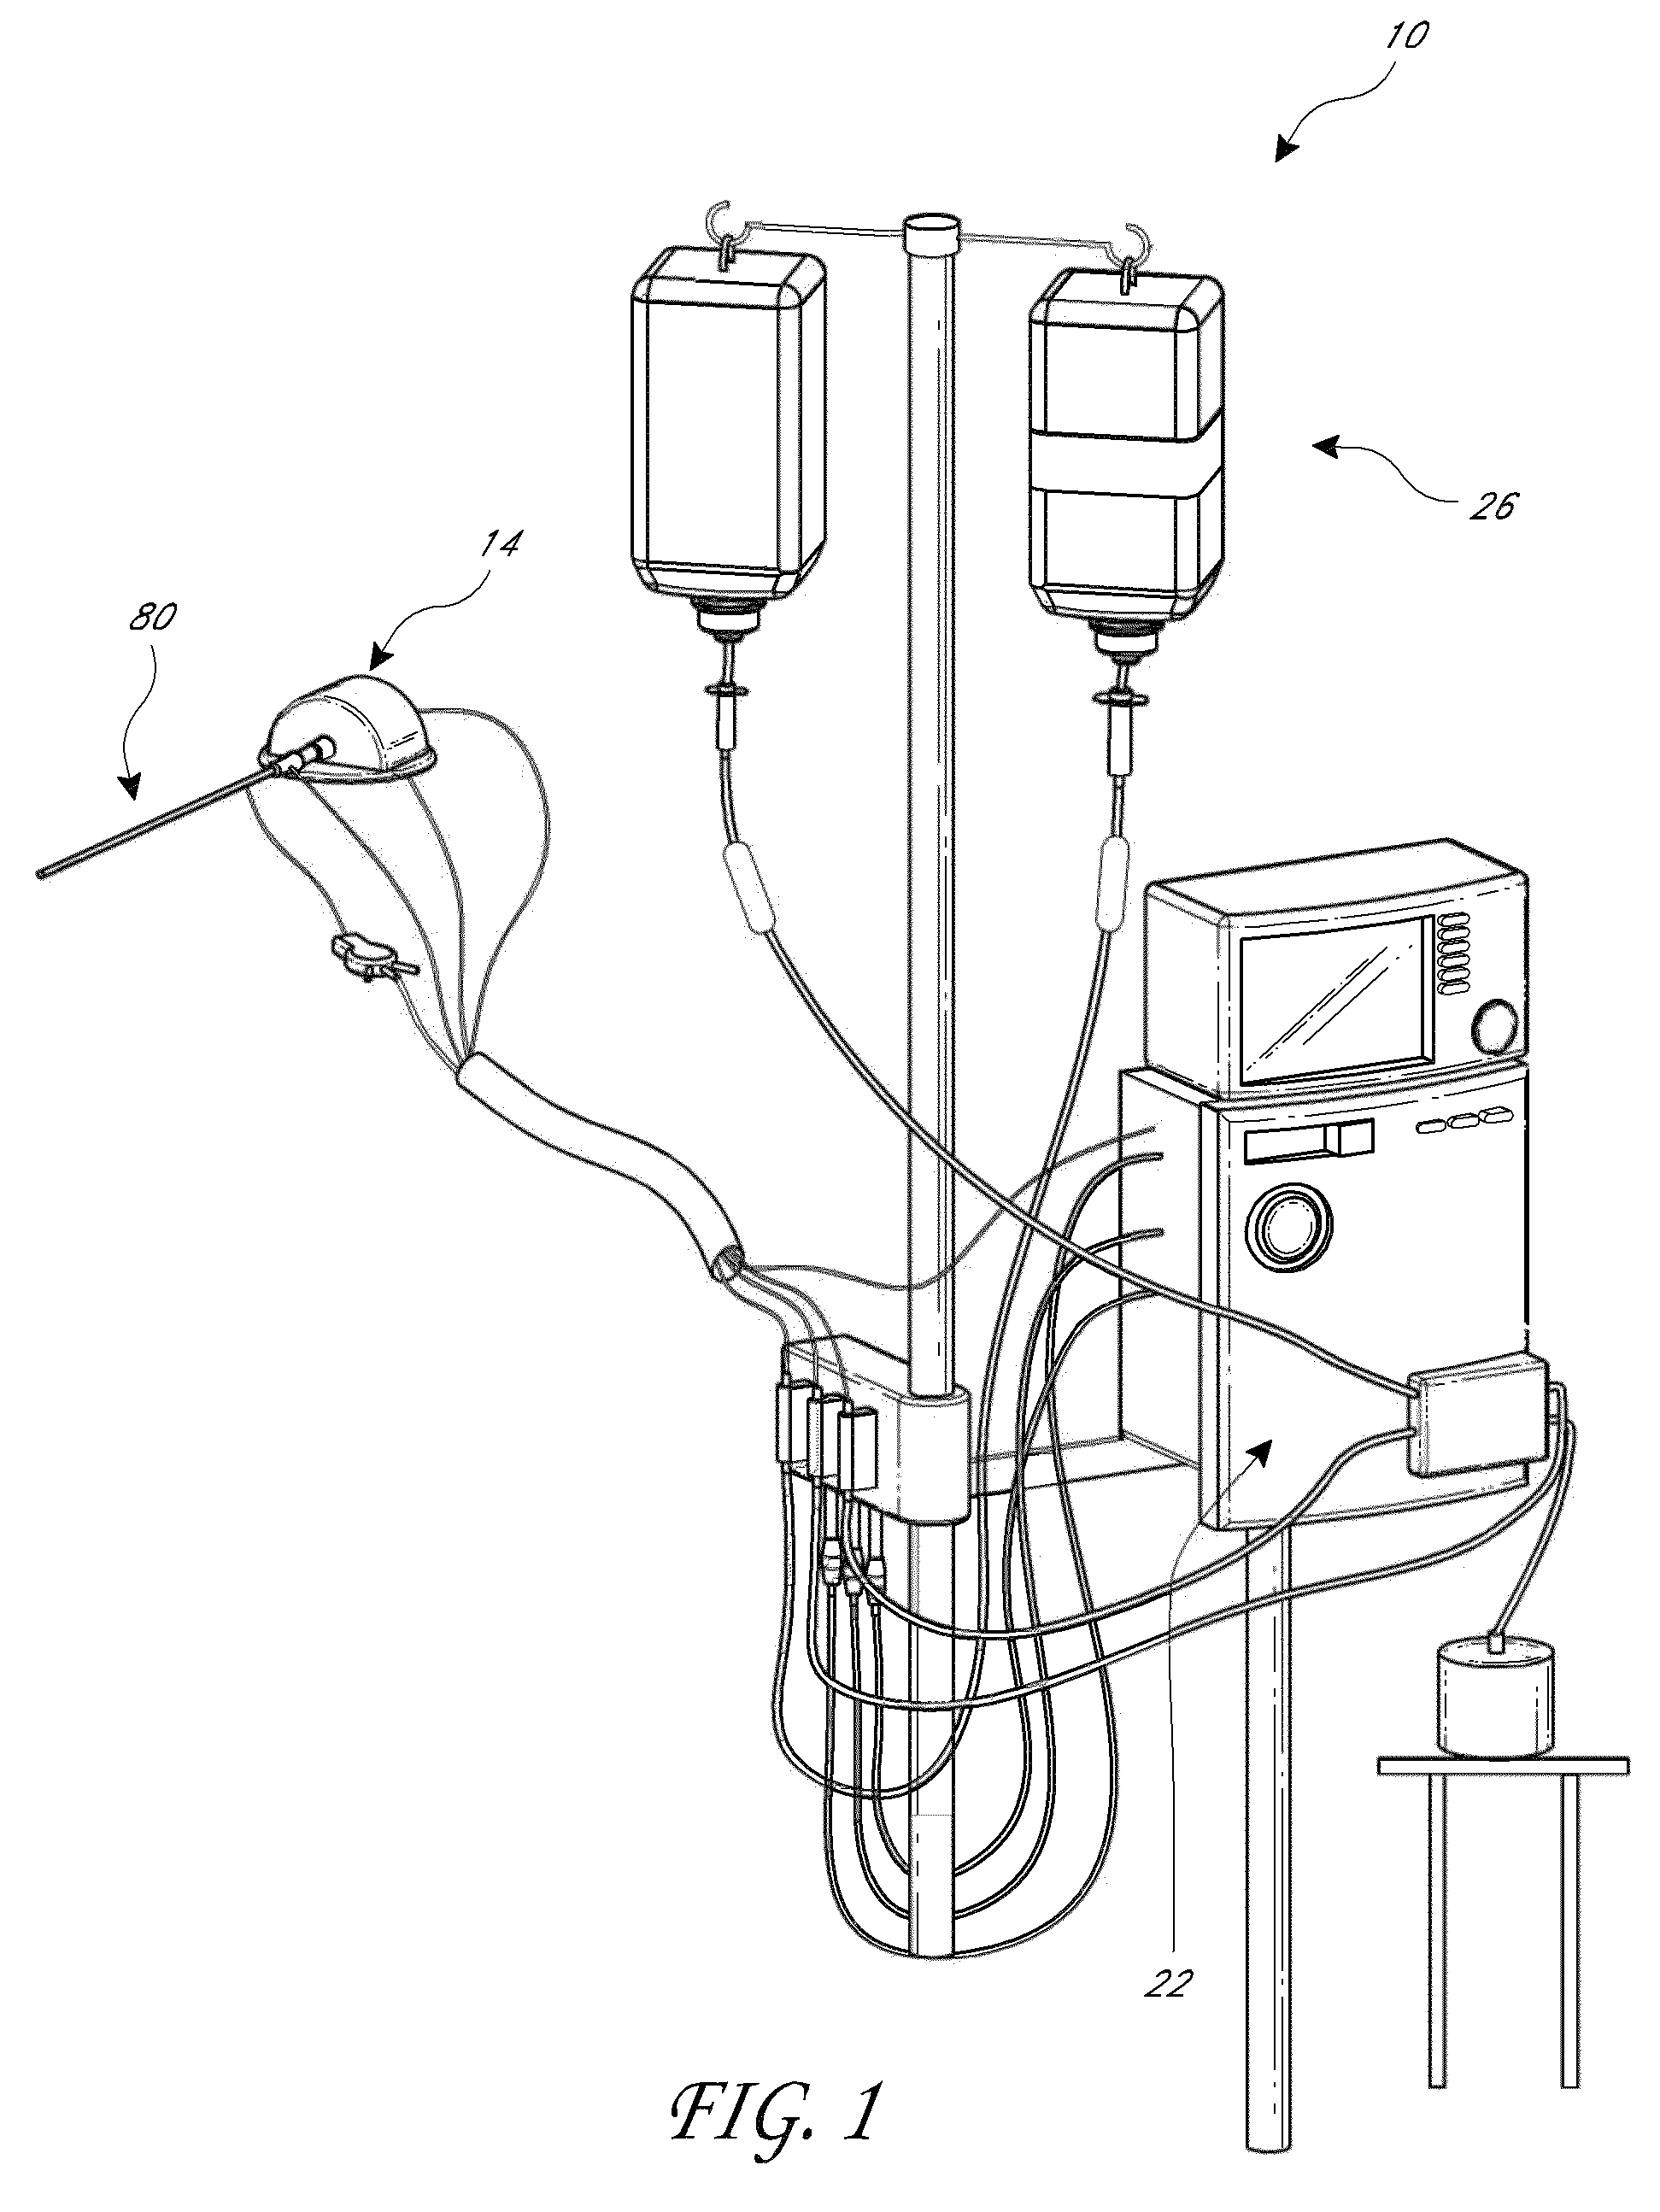 Catheter pump assembly including a stator